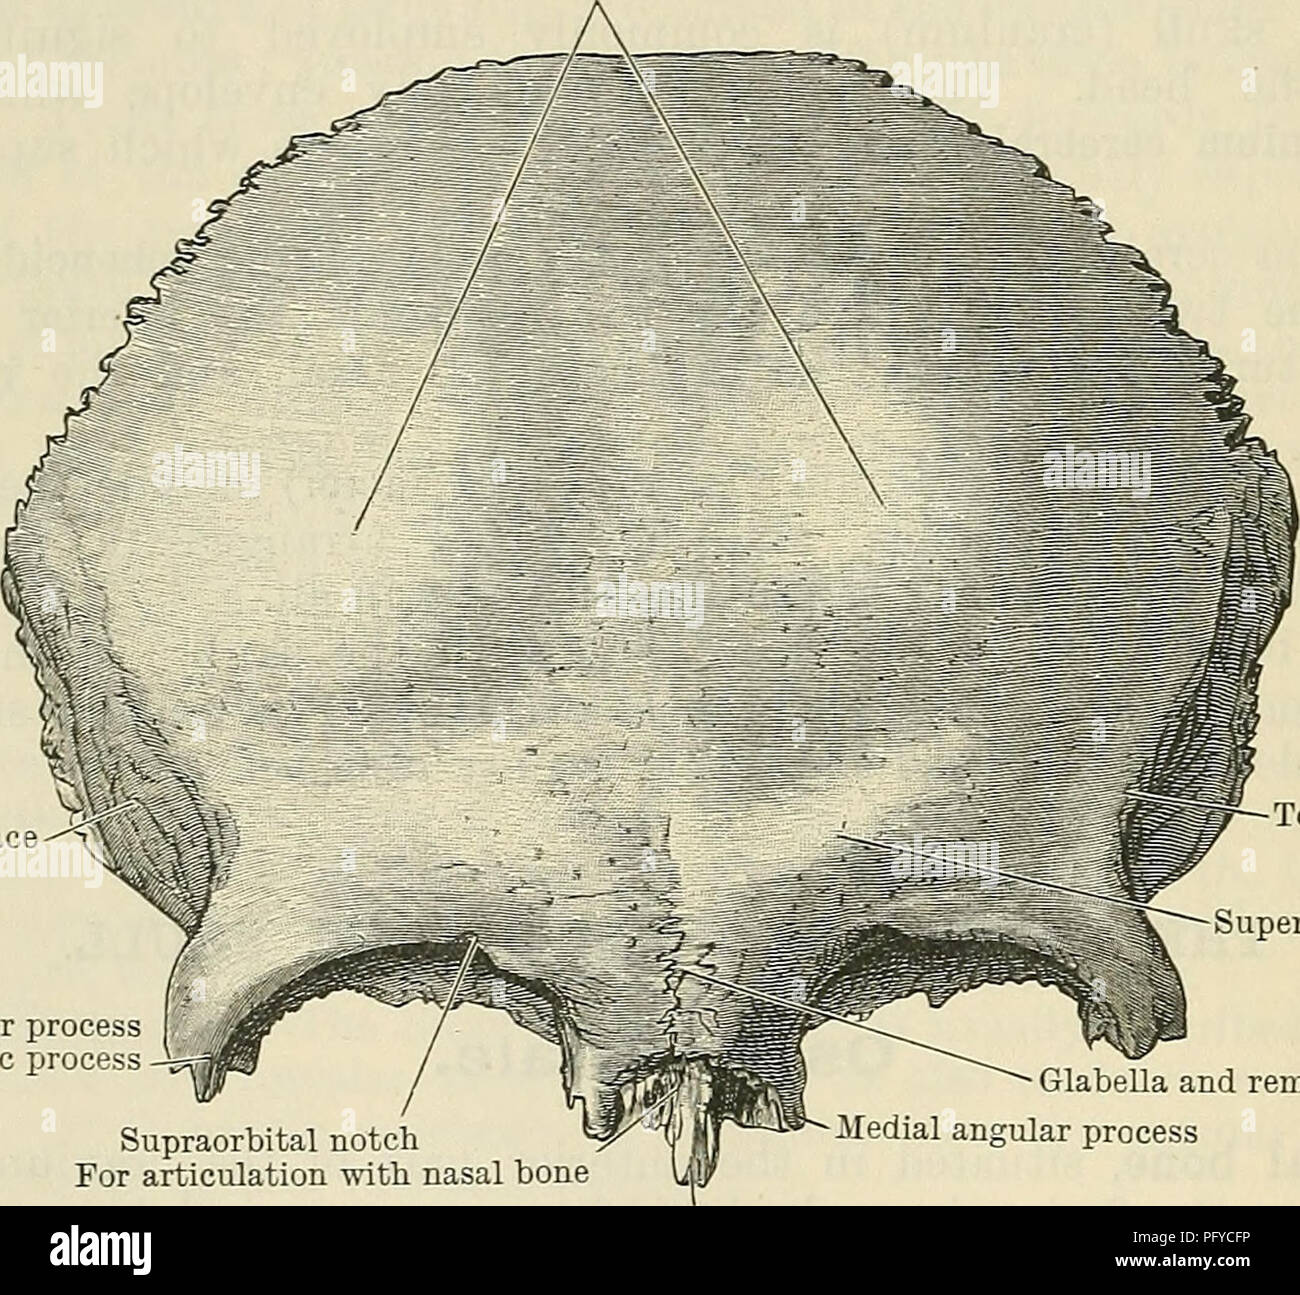 . Cunningham's Text-book of anatomy. Anatomy. 116 OSTEOLOGY. it is crossed by a groove, often (25 per cent, Krause) converted into a foramen—the supraorbital notchor foramen. Through this there pass the supraorbital nerve and artery. Sometimes (16 per cent, Loja) a series of grooves, radiating upwards and laterally, indicate the course of the nerve (Dixon). Above the supraorbital margin the character of the bone displays marked differences in the two sexes : in the male, above the interval between the two medial angular processes, there is usually a well-marked prominence, called the glabella; Stock Photo